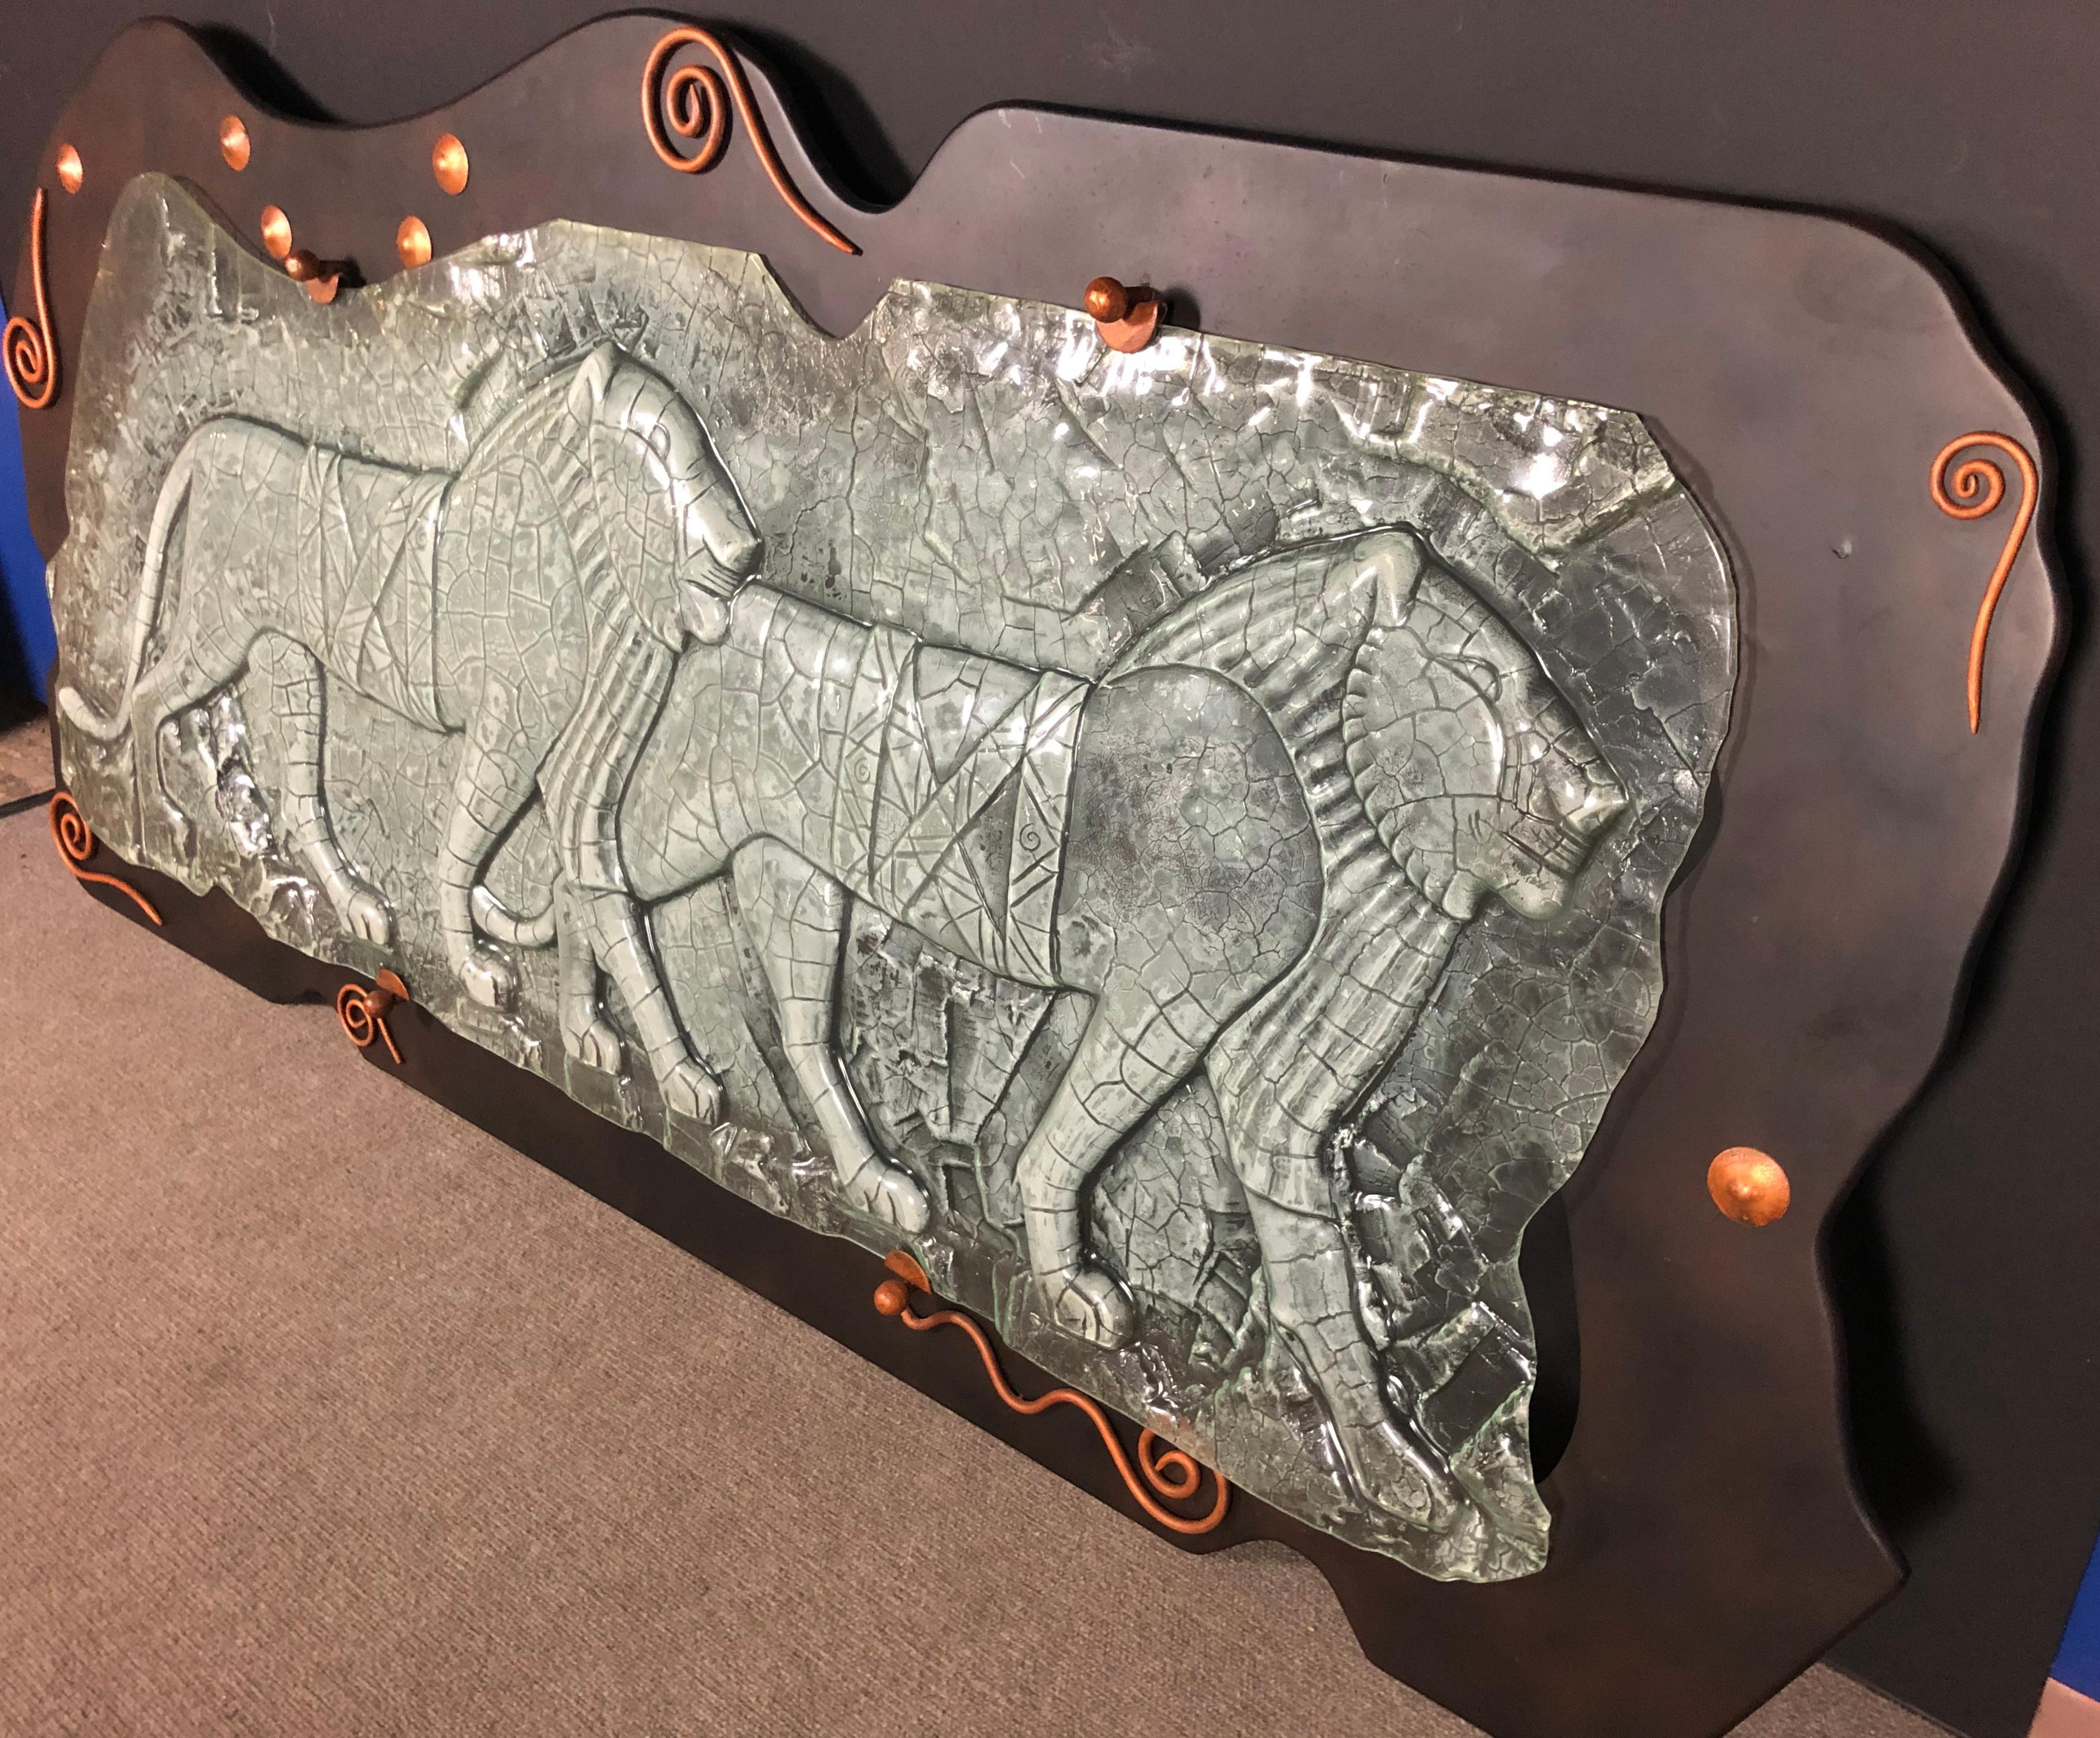 Impressive sculptural luminous wall hanging in glass and wrought iron, Mexico, circa 1980 De Anda Mr
Electrified wall art featuring two lions in stride, using glass slumping technique.
   